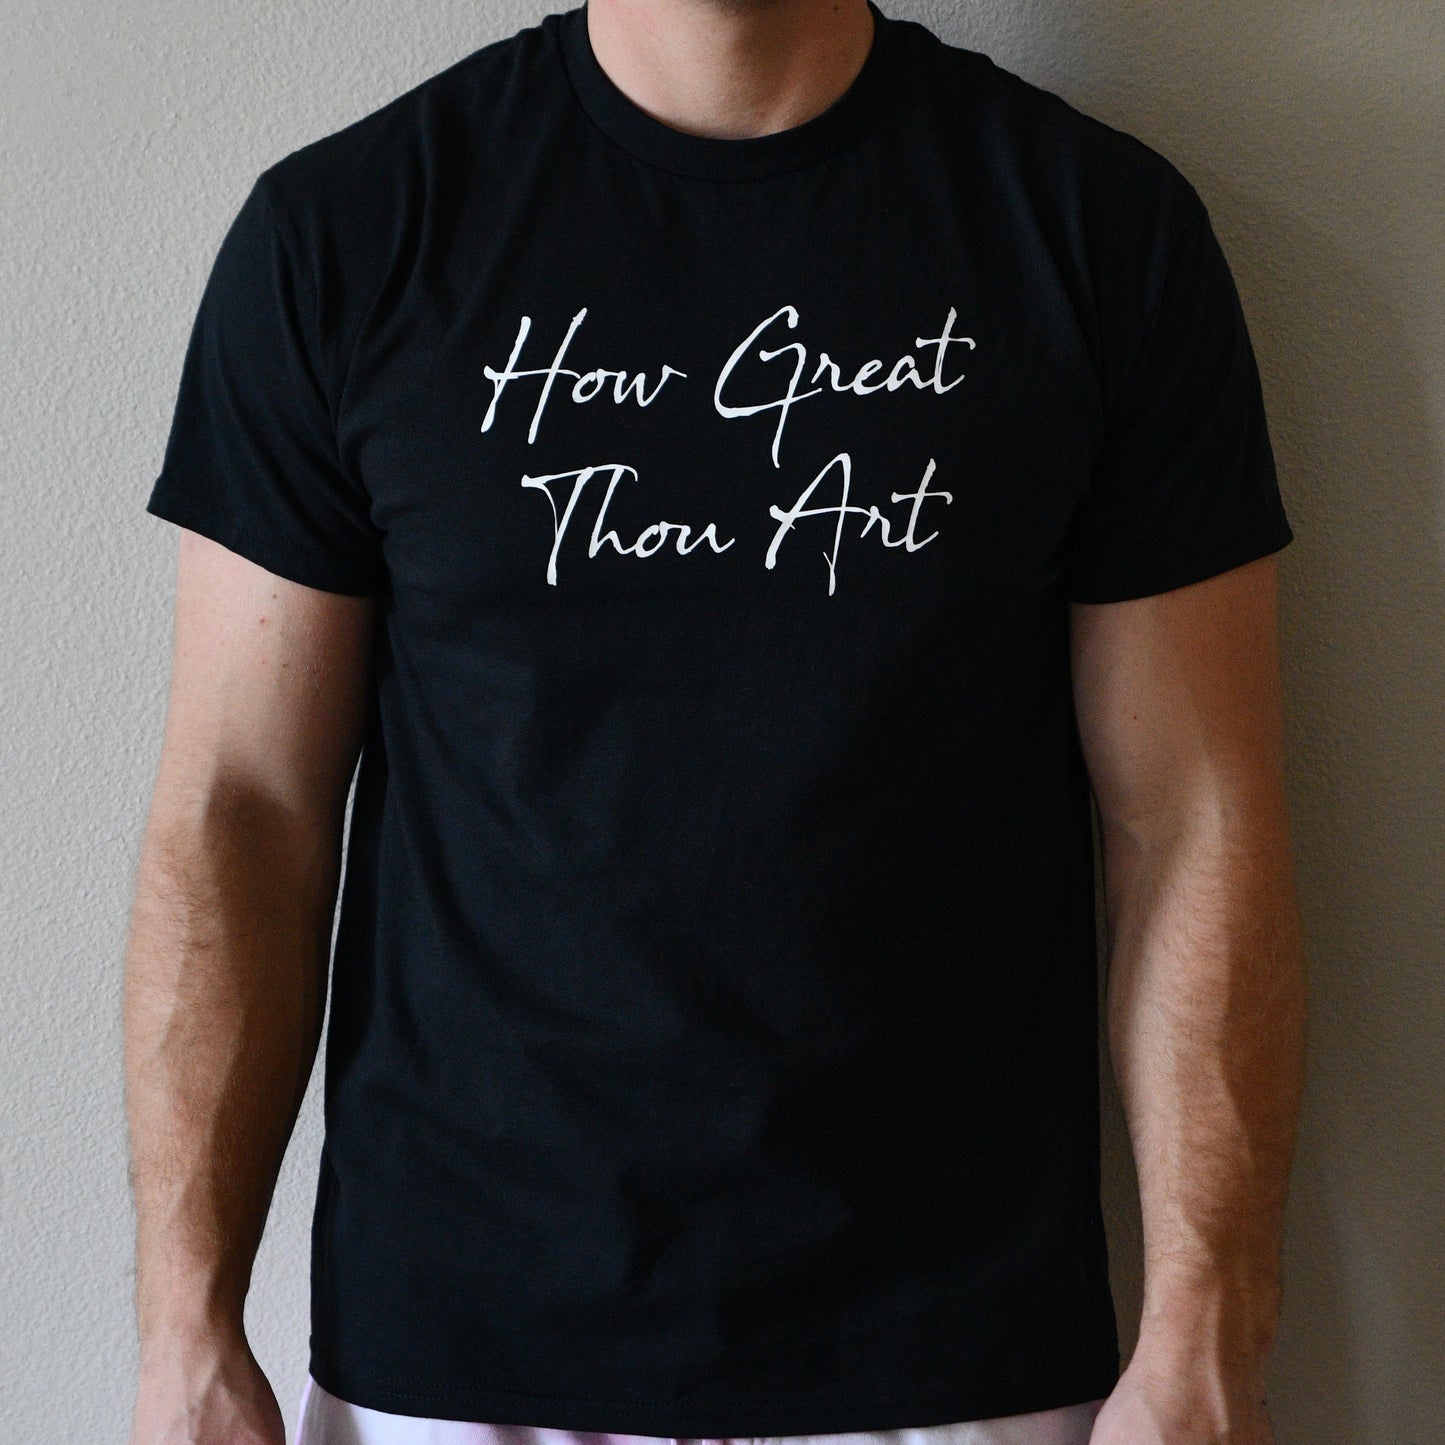 How Great Thou Art - 5 Sizes, 4 Colors Available